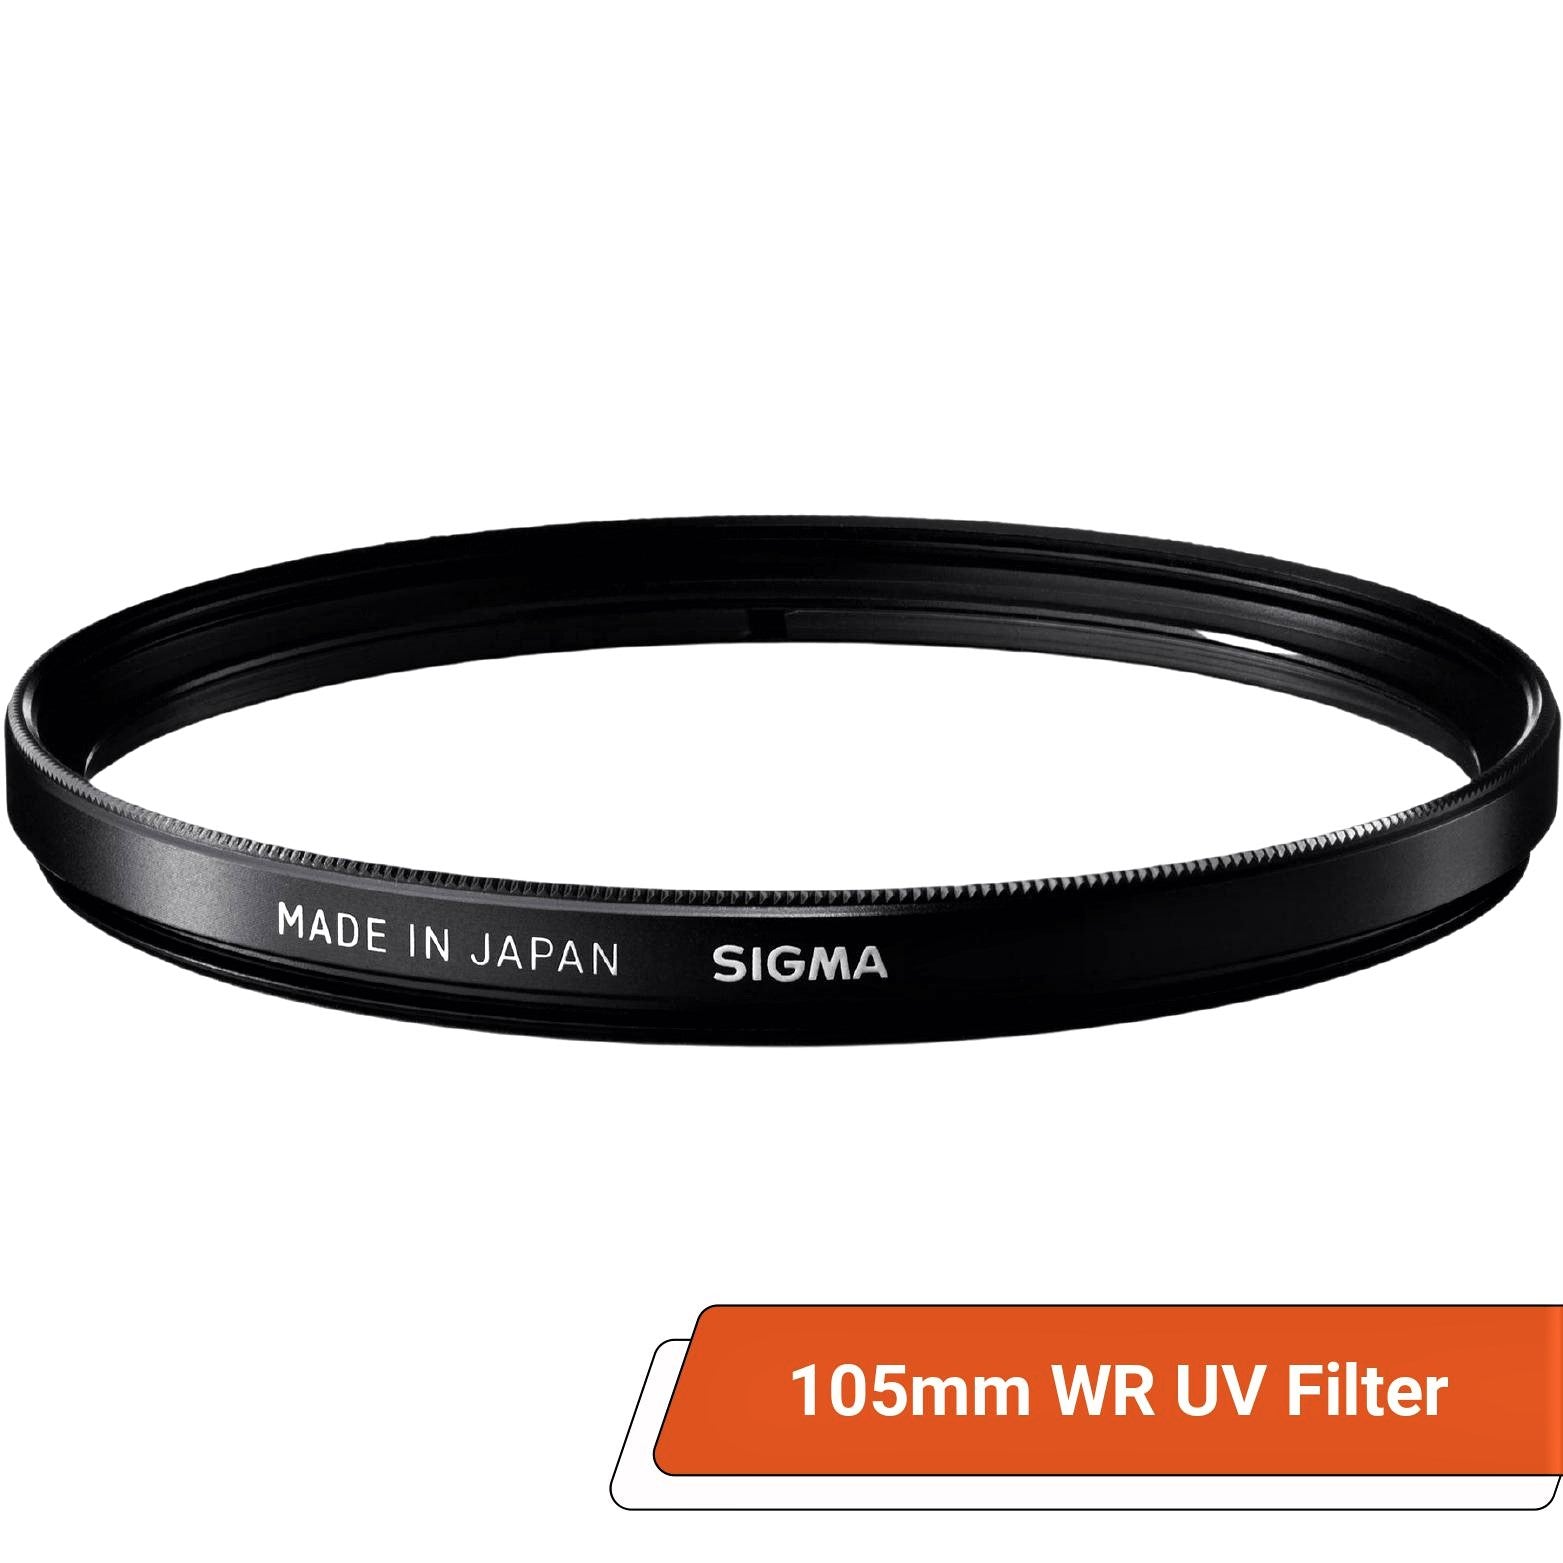 Sigma 105mm WR (Water Repellent) UV Filter